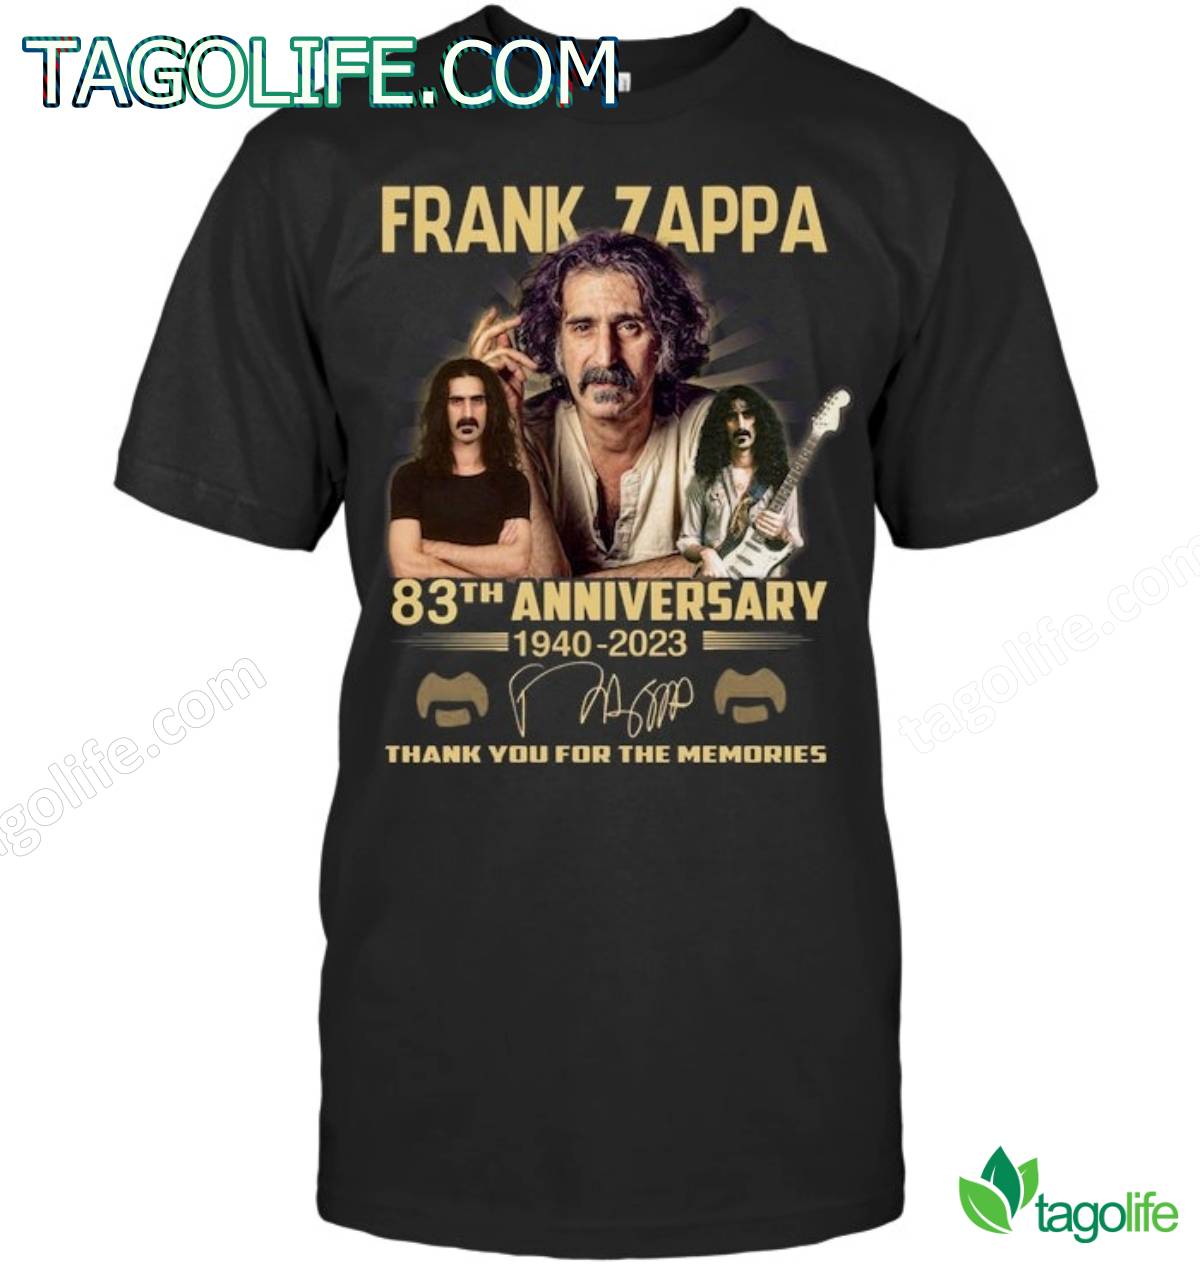 Frank Zappa 83th Anniversary 1940-2023 Signature Thank You For The Memories Shirt, Tank Top